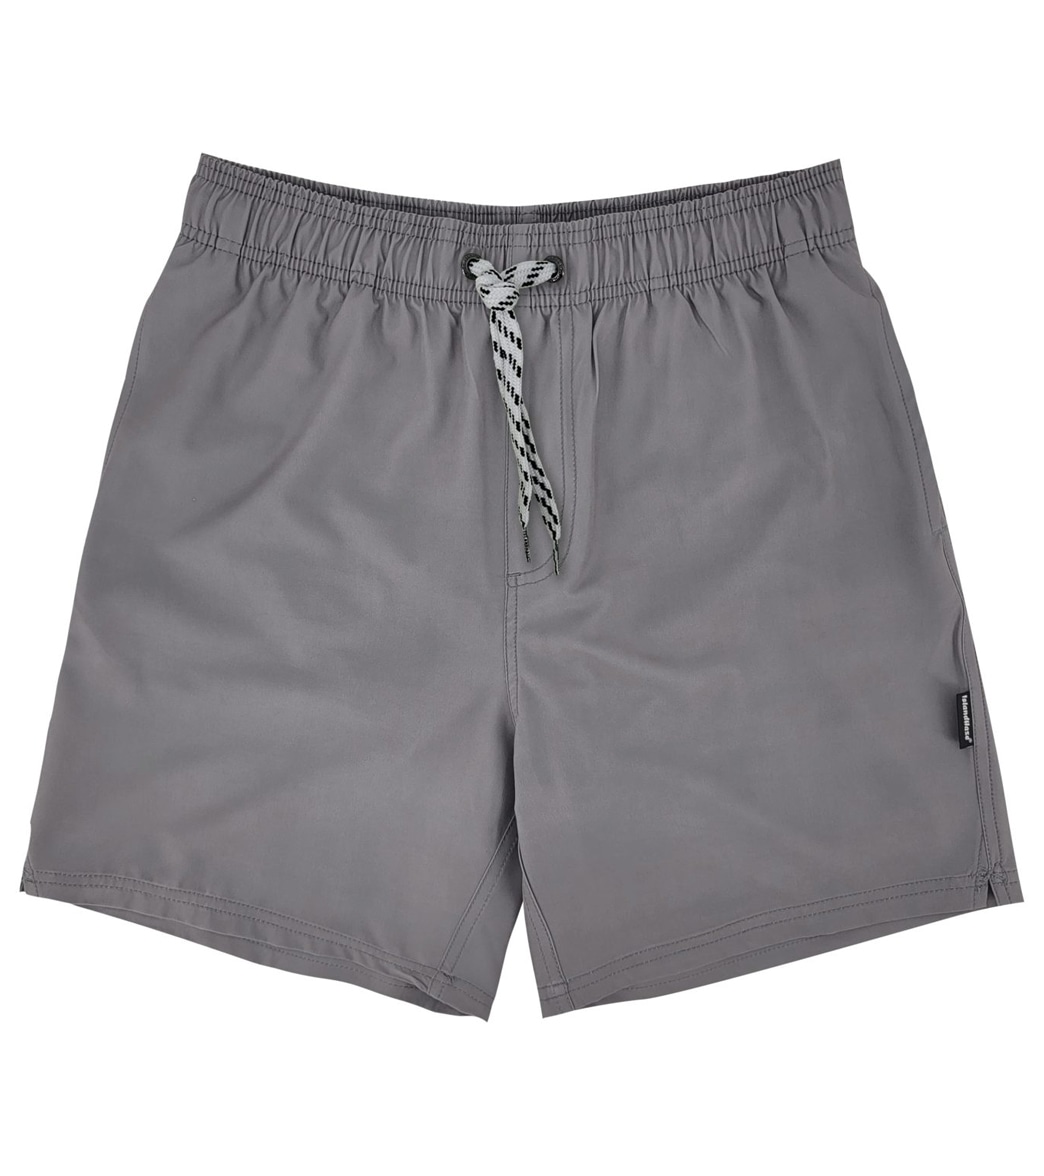 Island Haze Men's 16.5 Barbados Solid Volley Shorts - Grey Large Polyester - Swimoutlet.com